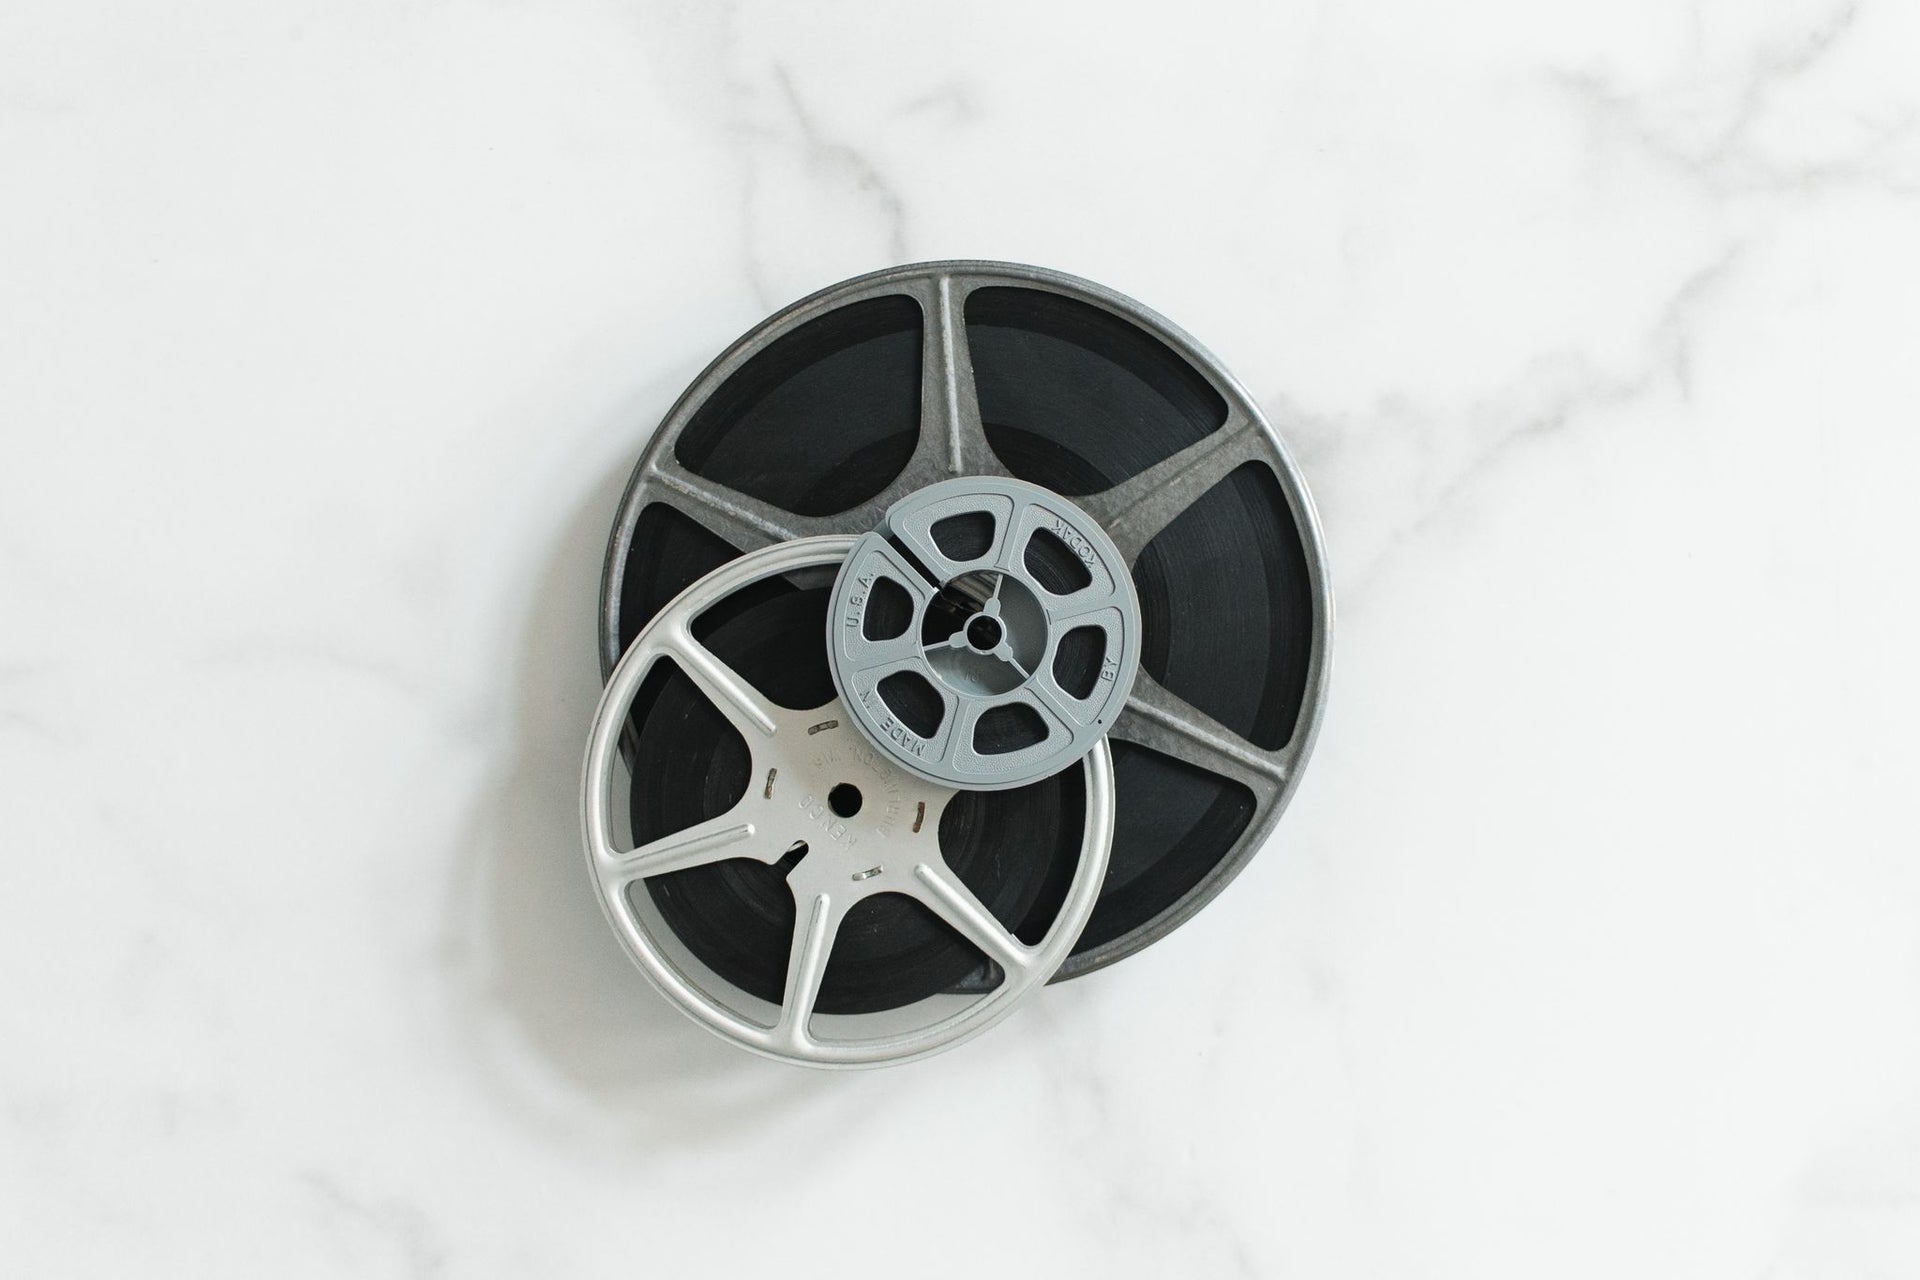 Idea for old film reels instead of old wheels.